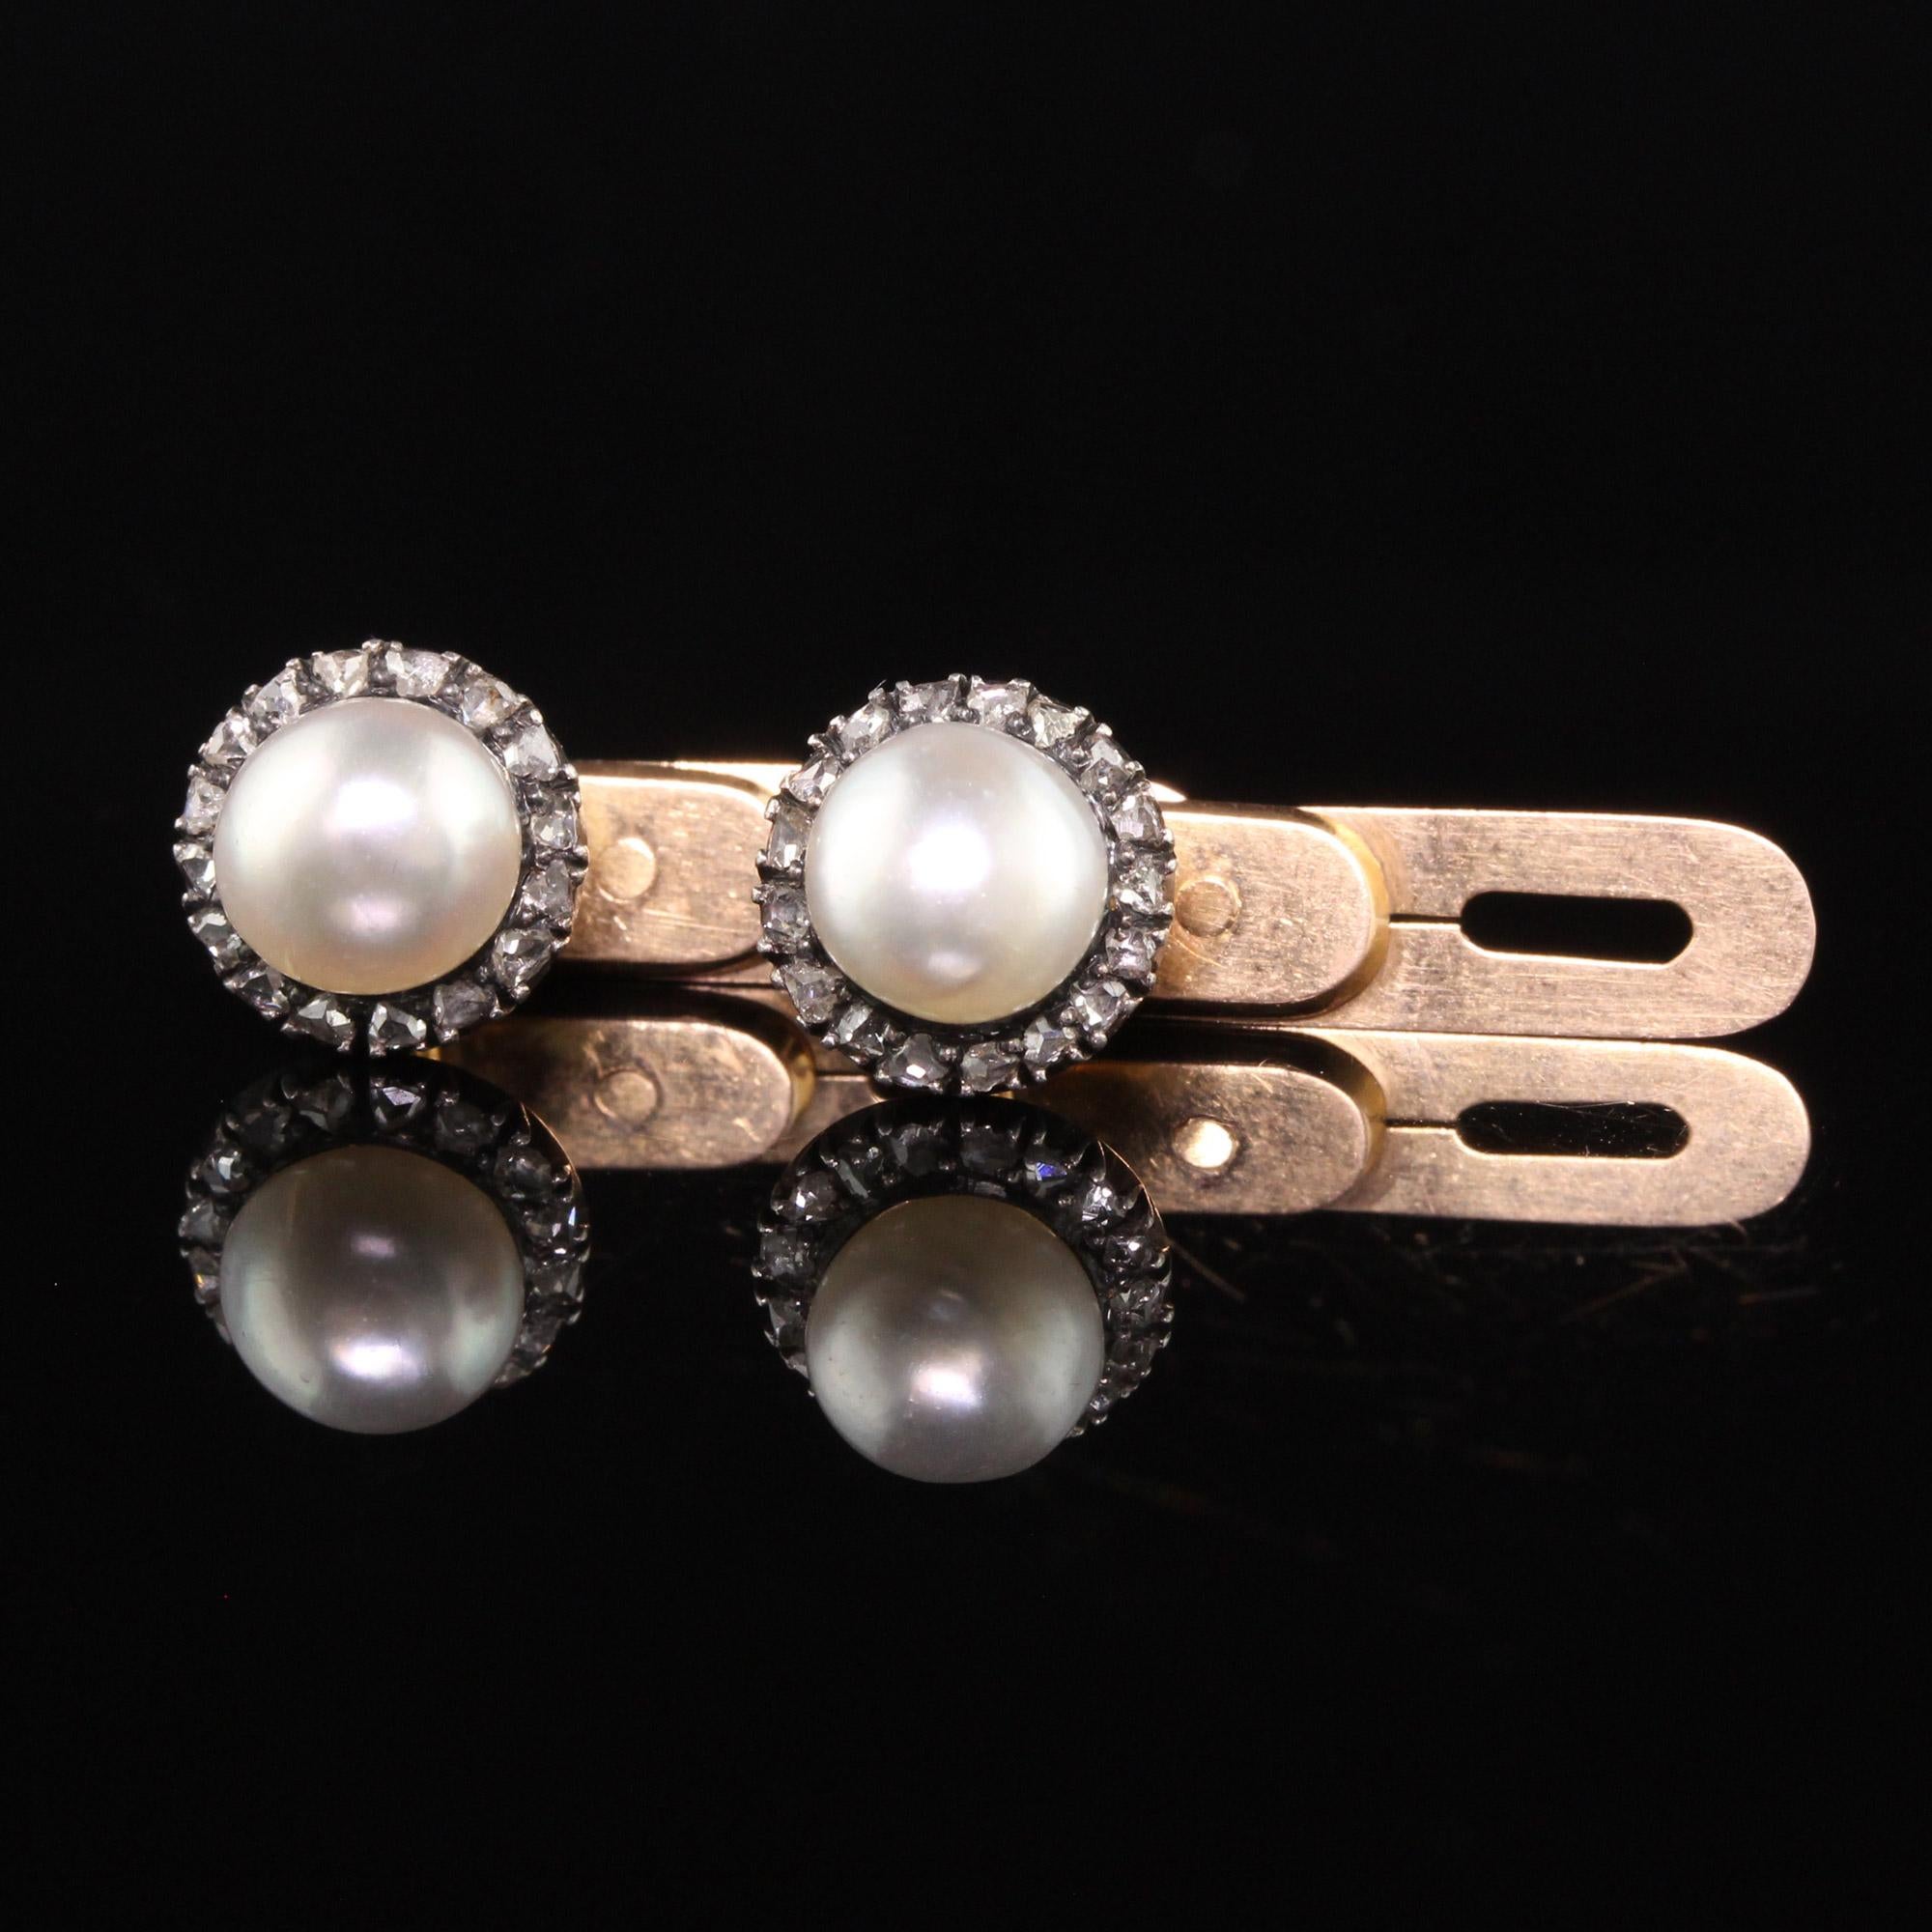 Antique Victorian 18K Yellow Gold Silver Top Natural Pearl and Diamond Cufflinks 1